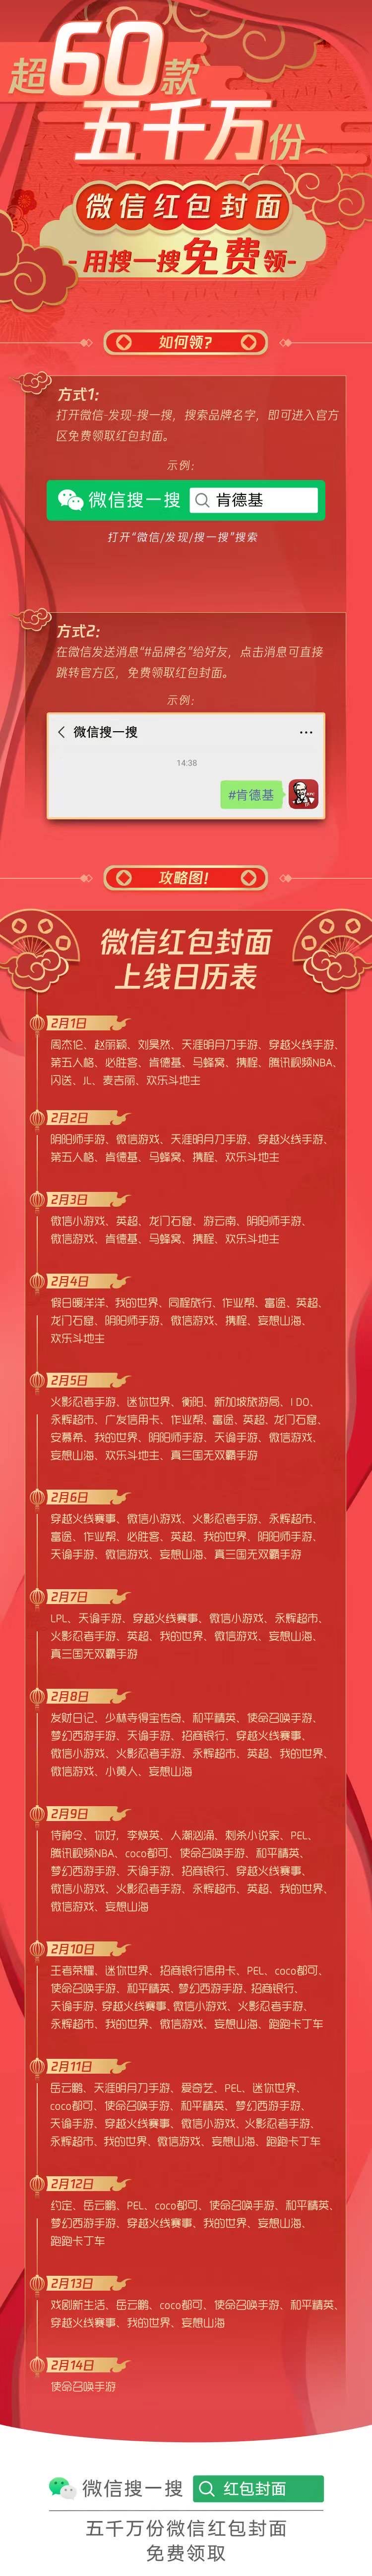 Tecent, Netease, rice with a ha swims contend for enter bureau, did cover of small letter red bag become a place with a draught of Spring Festival archives? 